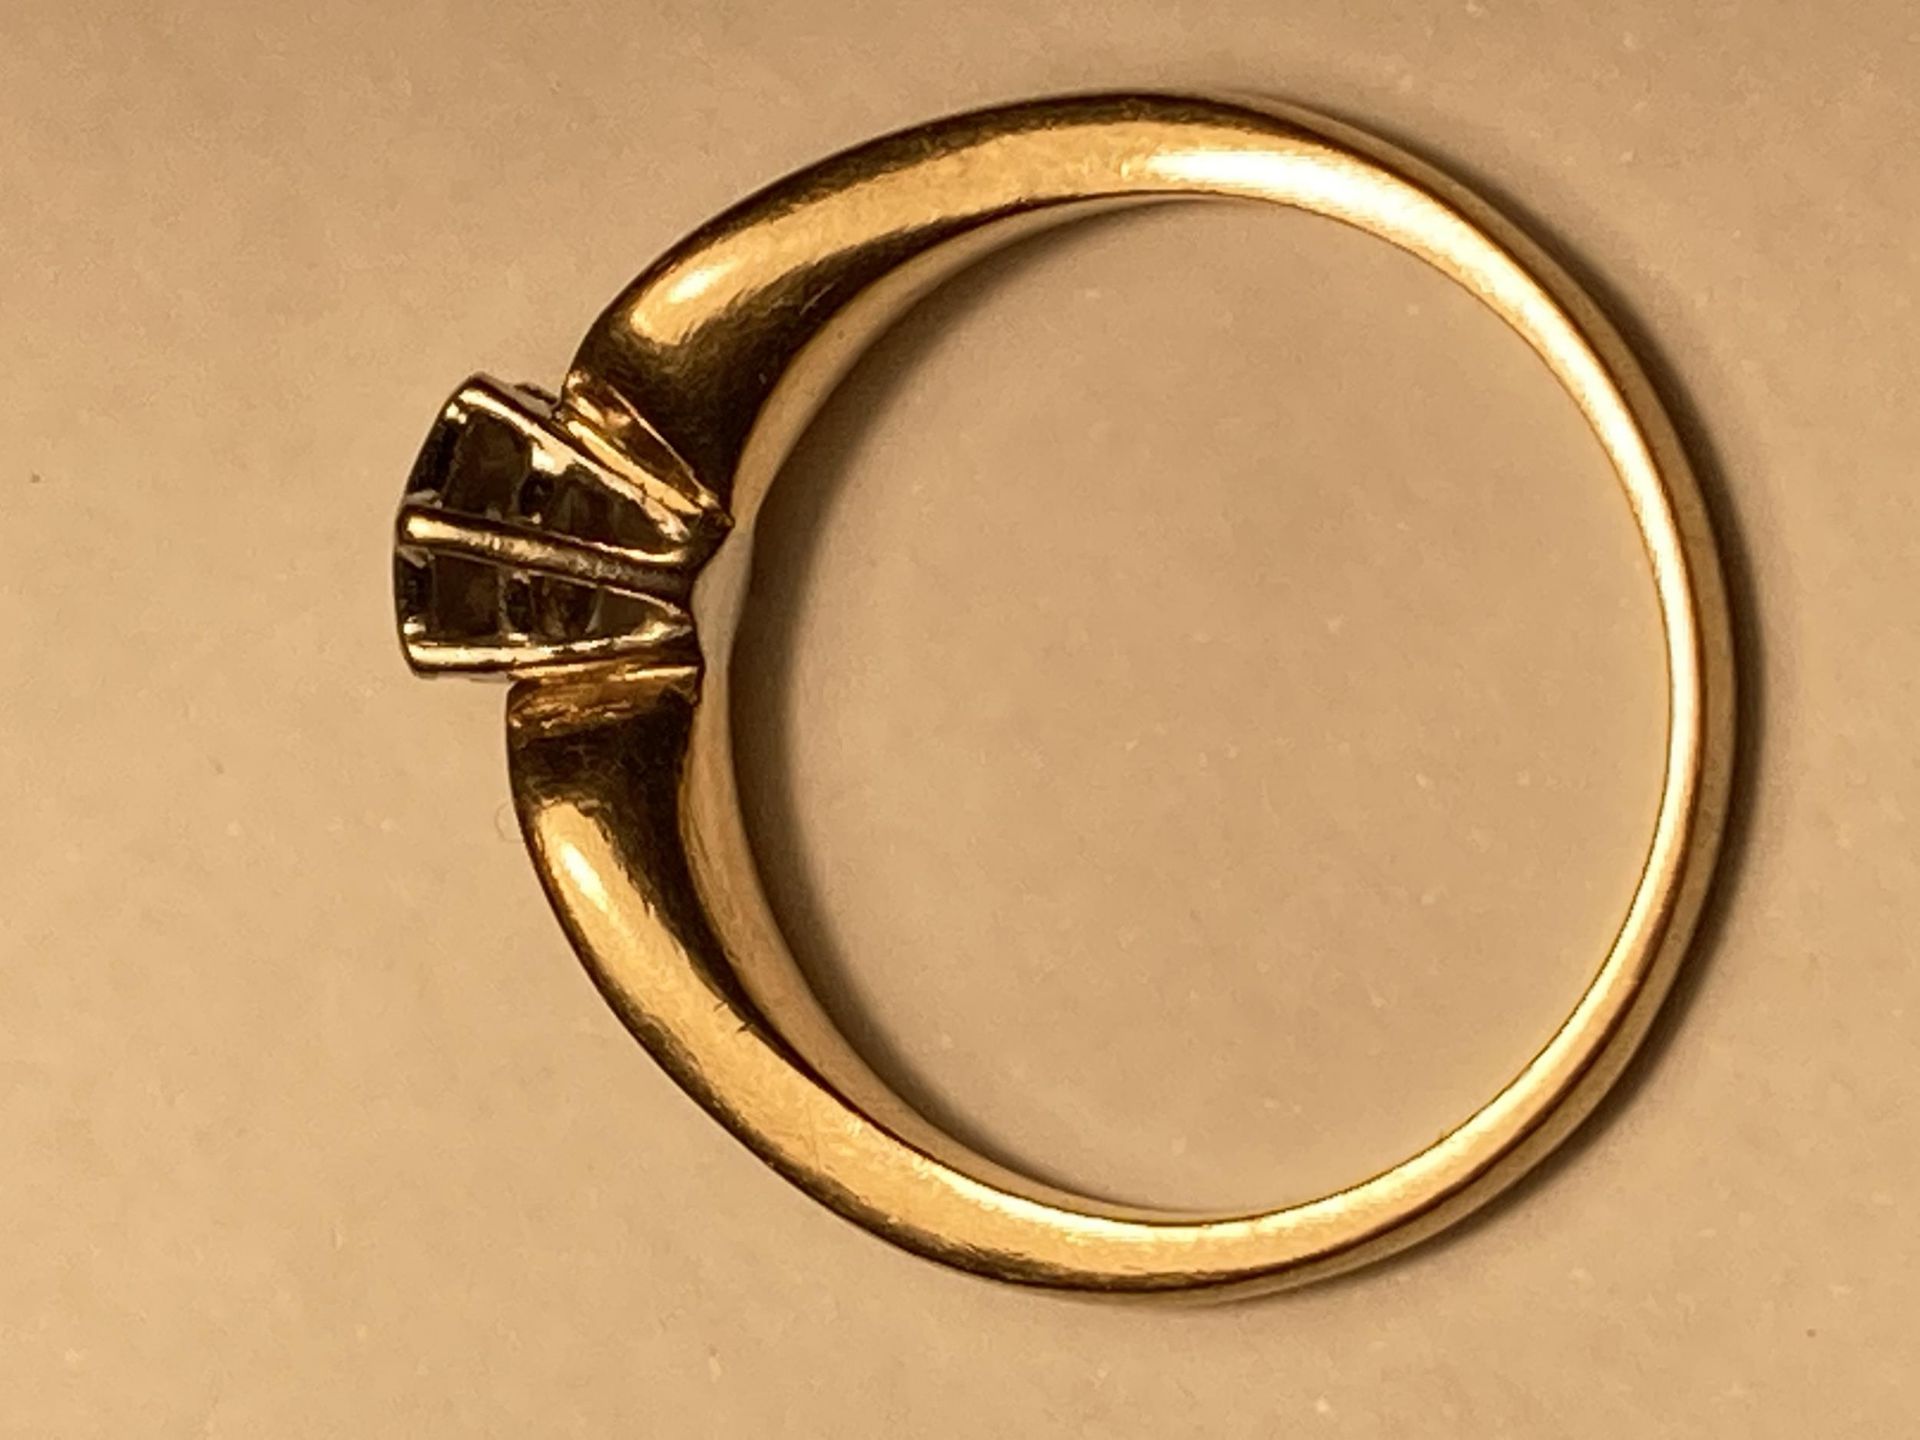 A 9 CARAT GOLD RING WITH A DIAMOND SOLITAIRE SIZE J - Image 3 of 3